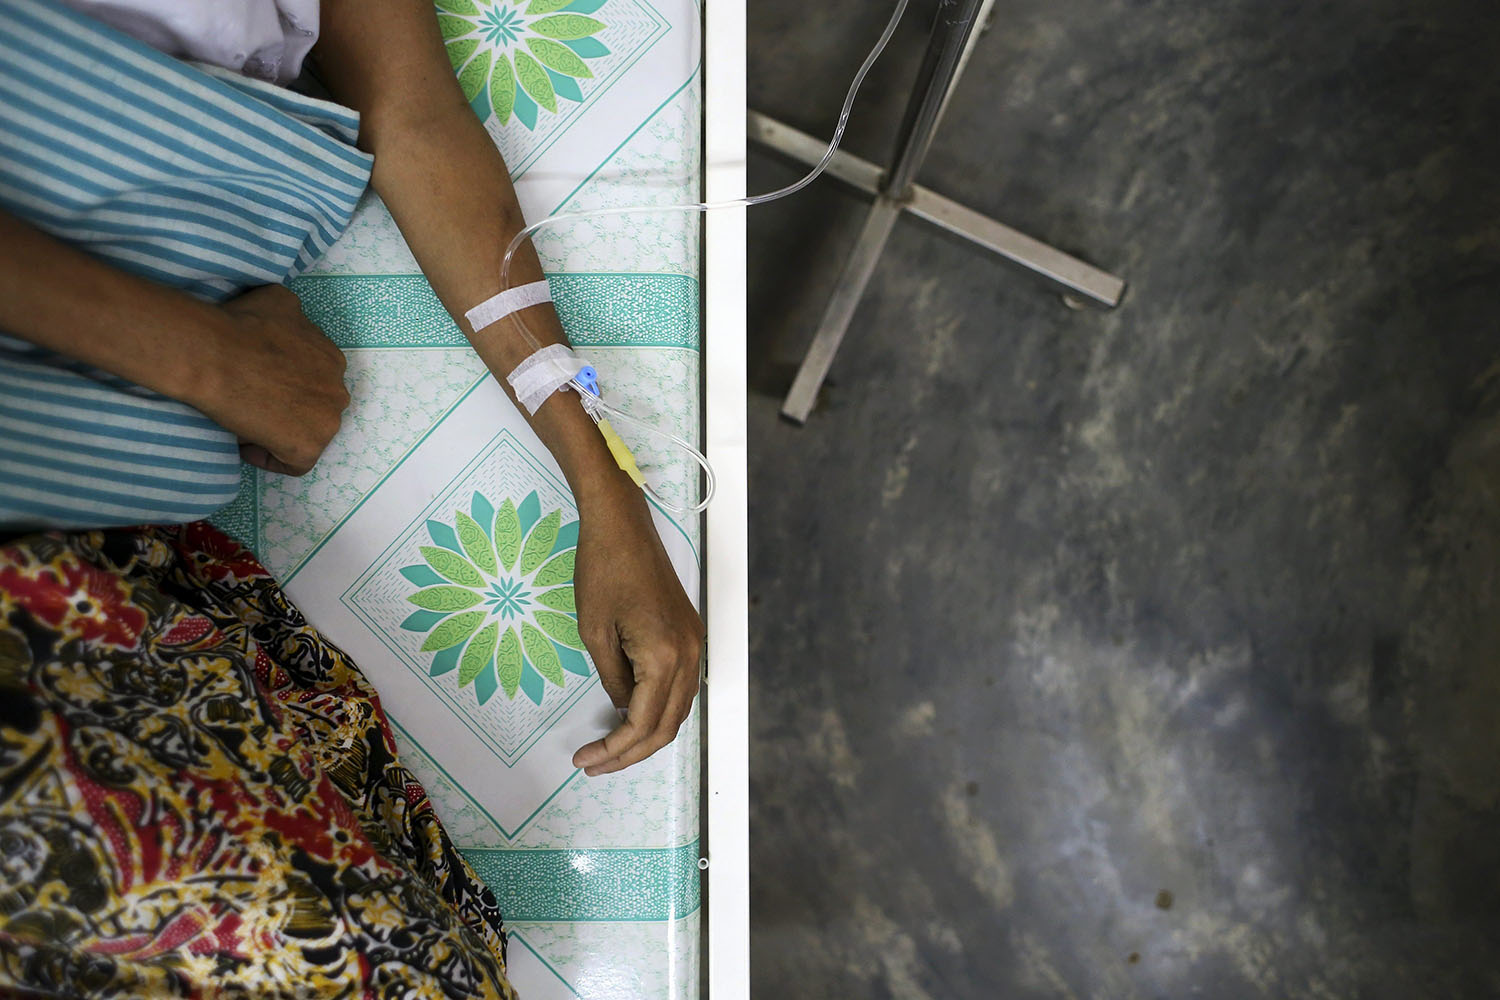 A HIV-positive patient receives medicine through an intravenous drip at Medecins Sans Frontieres Holland's clinic in Yangon